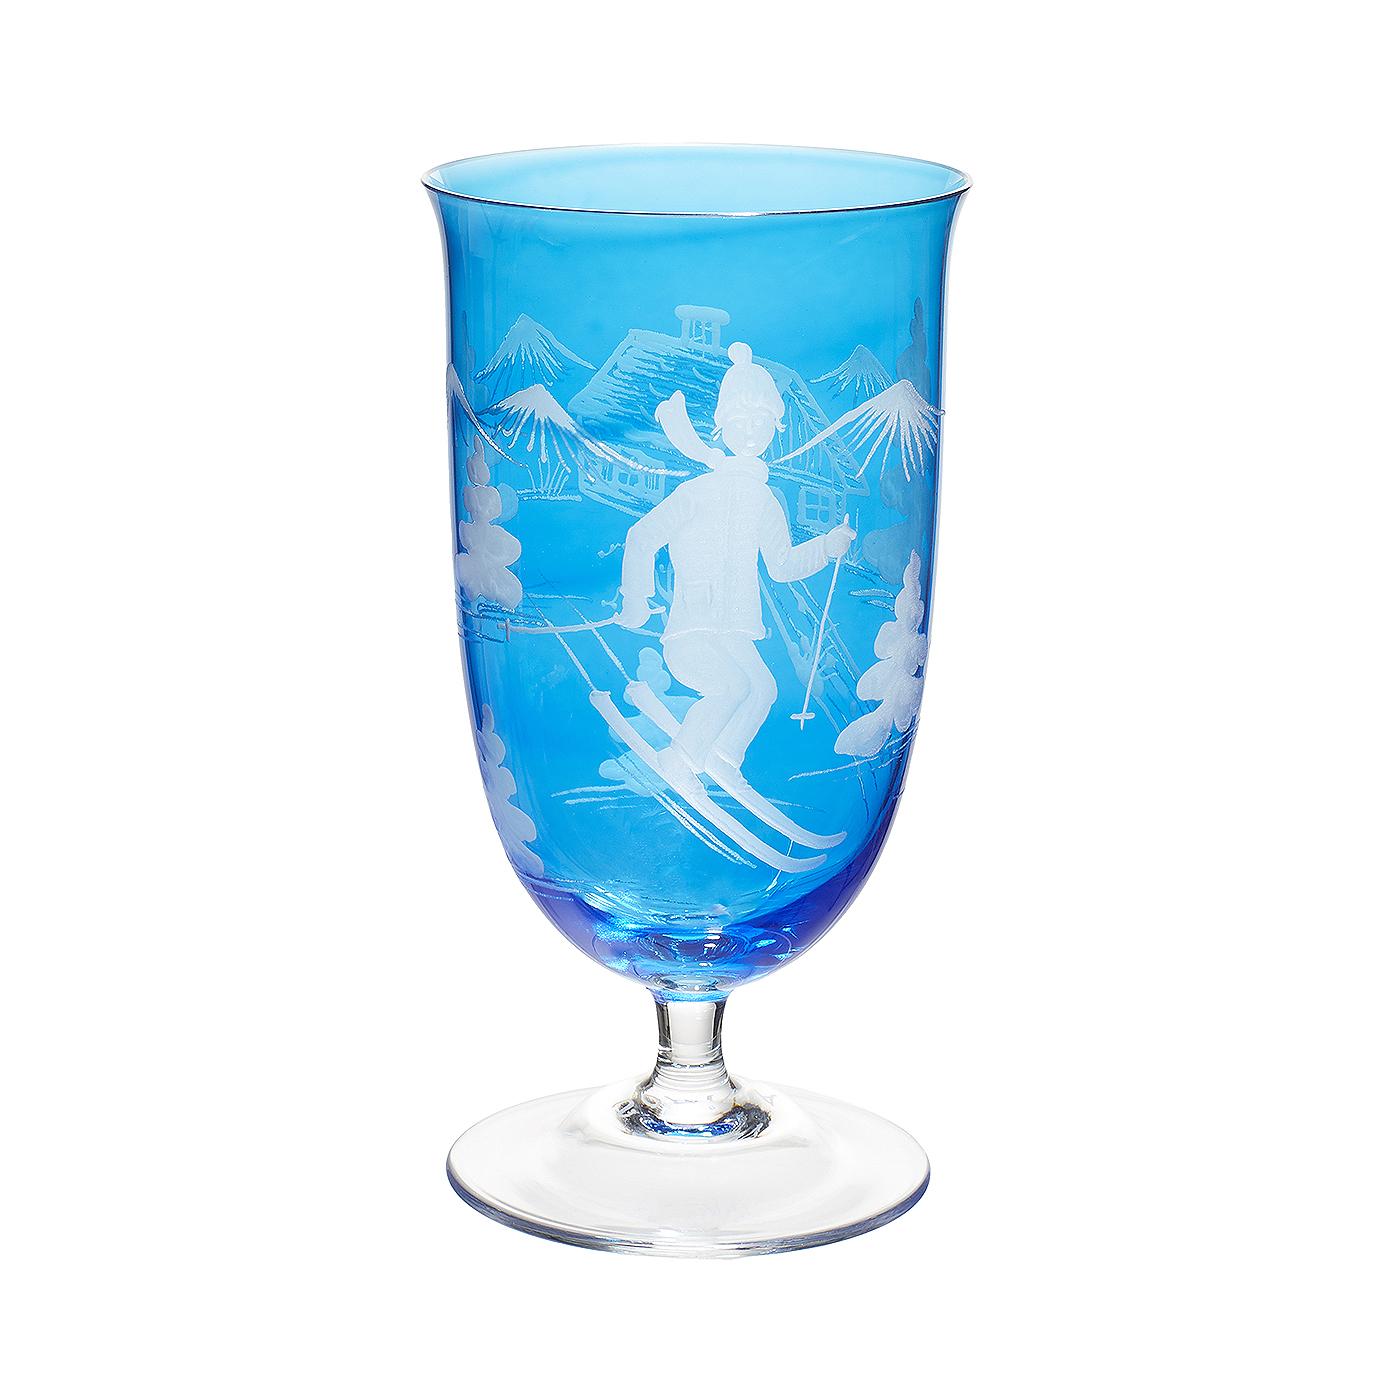 Set of six hand blown glasses in blue crystal with a hand-edged skier decor in the country style. The decor is a modern scene, showing a skier boy, trees and mountains and a chalet all-over the glass. All Sofina glasses are hand blown and engraved